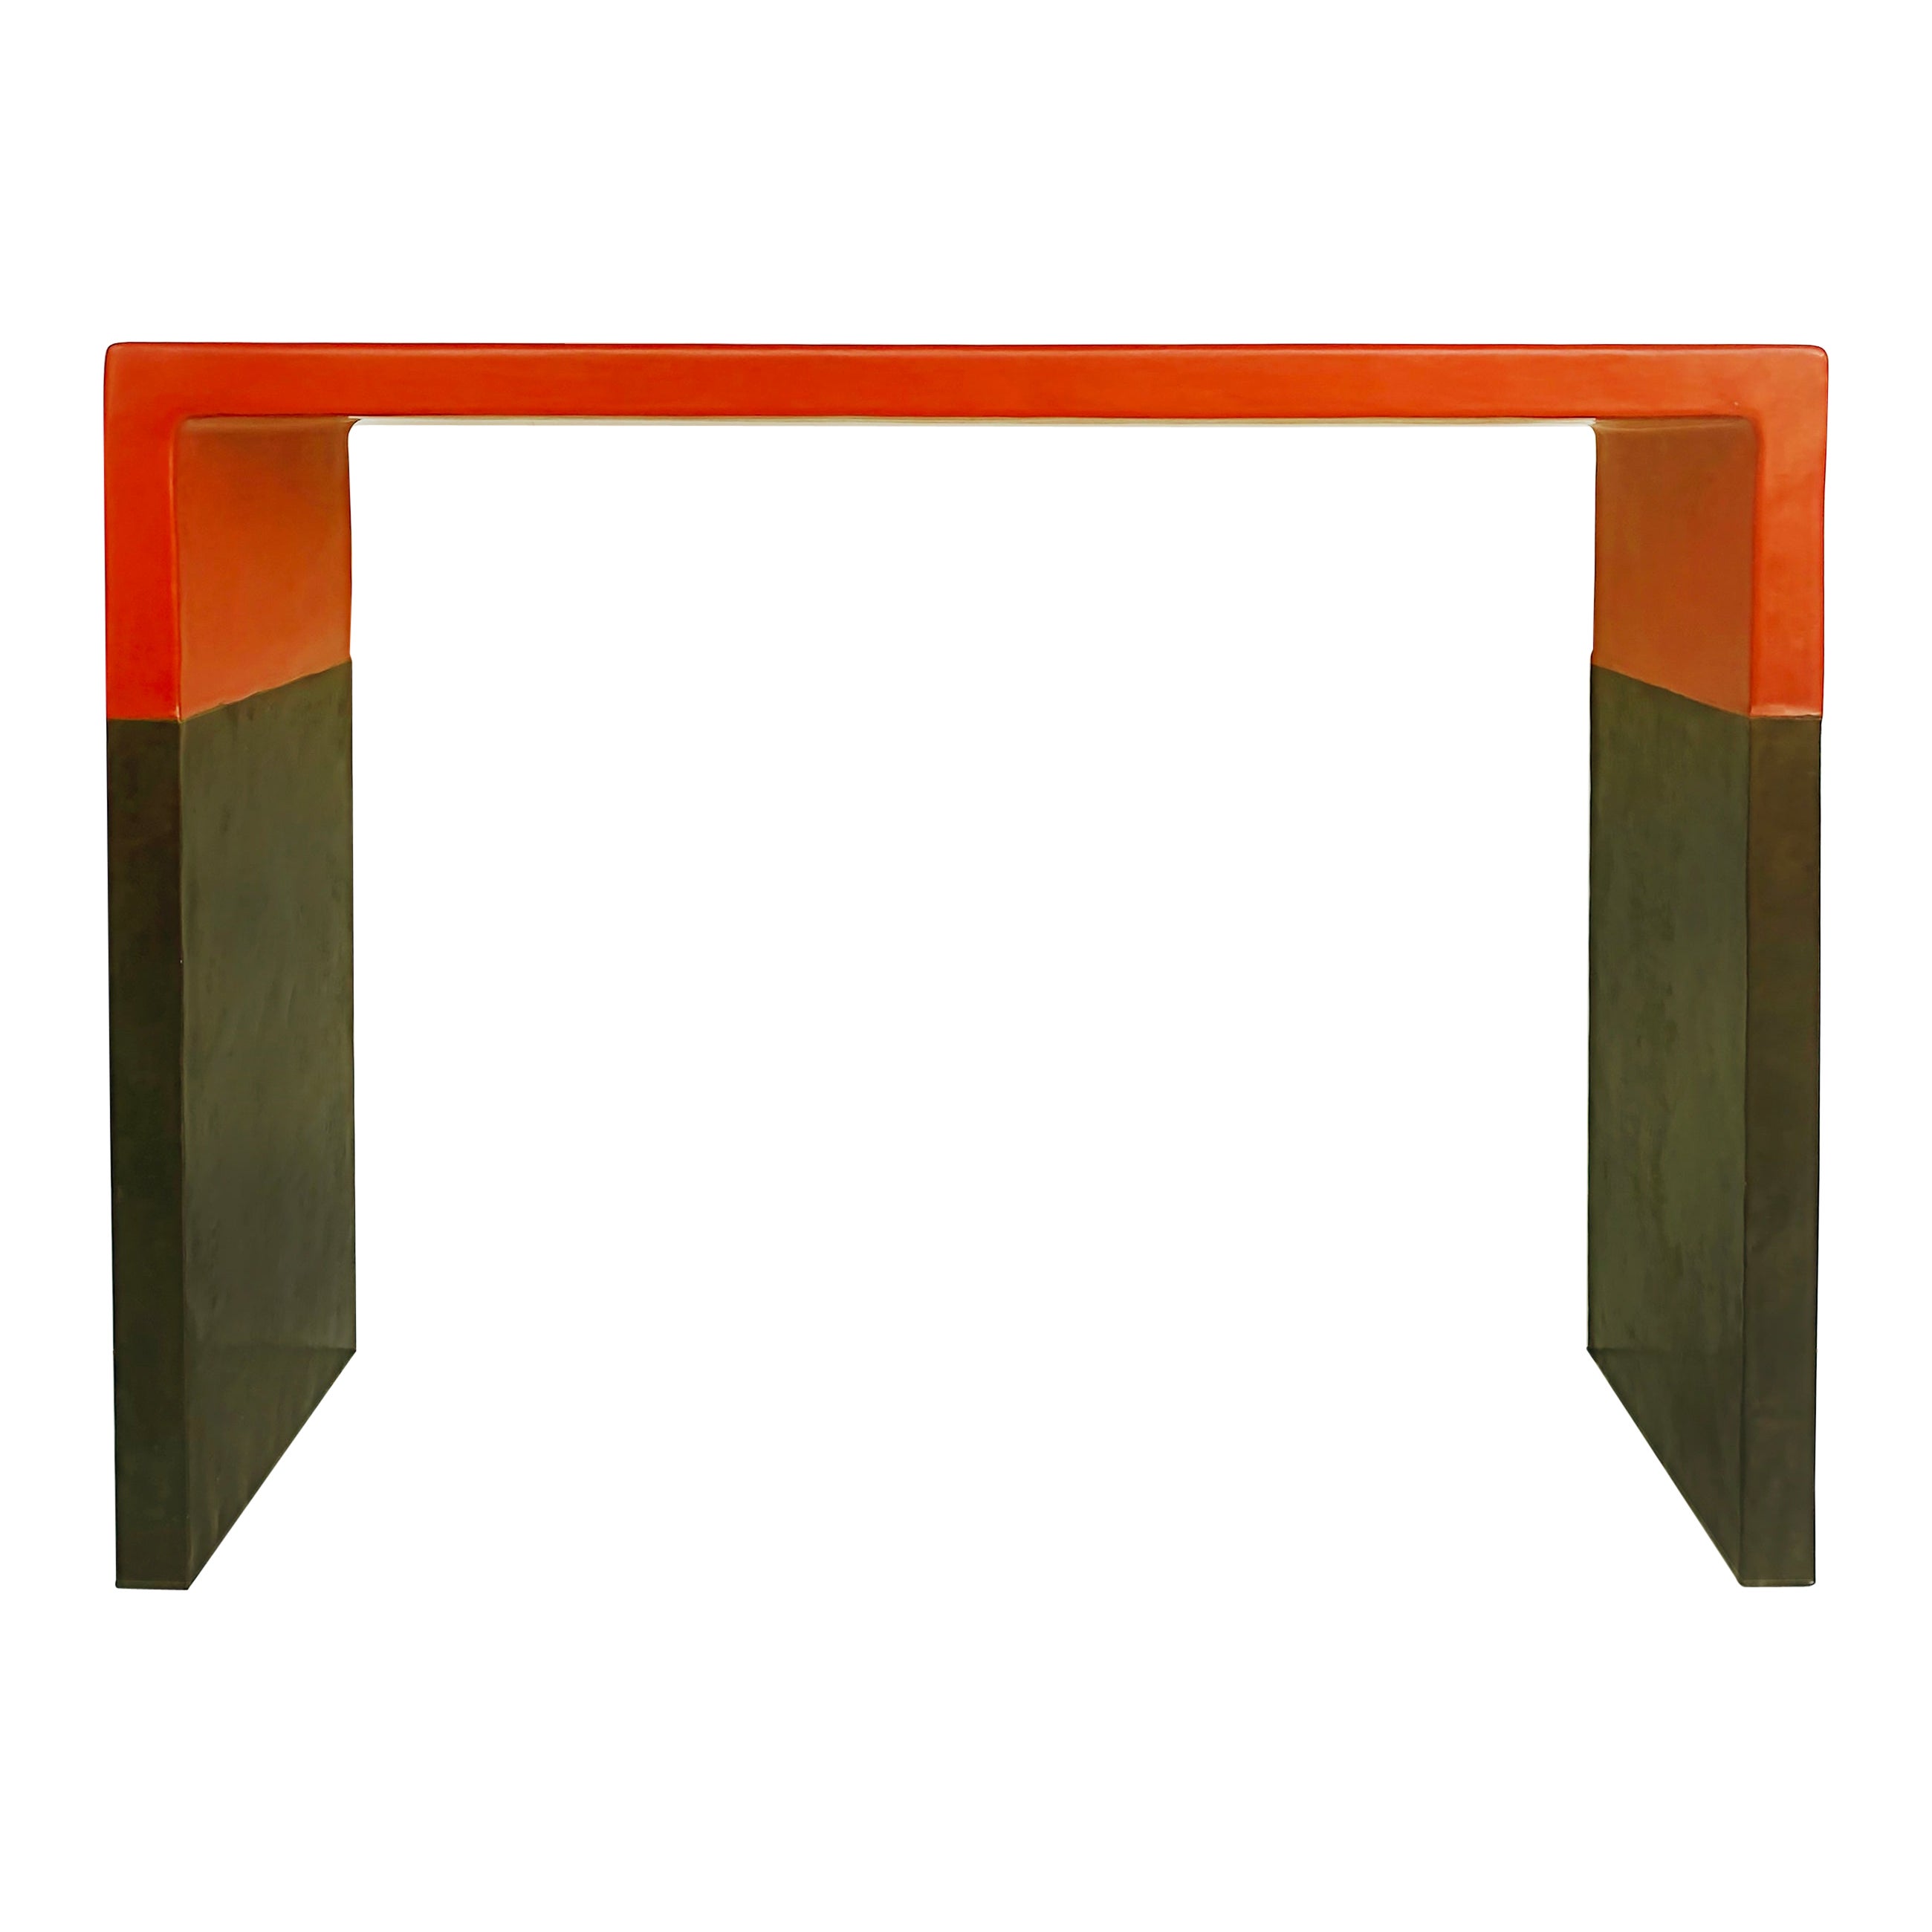 Robert Kuo Baker Furniture Lacquer, Copper Console Table, One-Off, circa 2000 For Sale